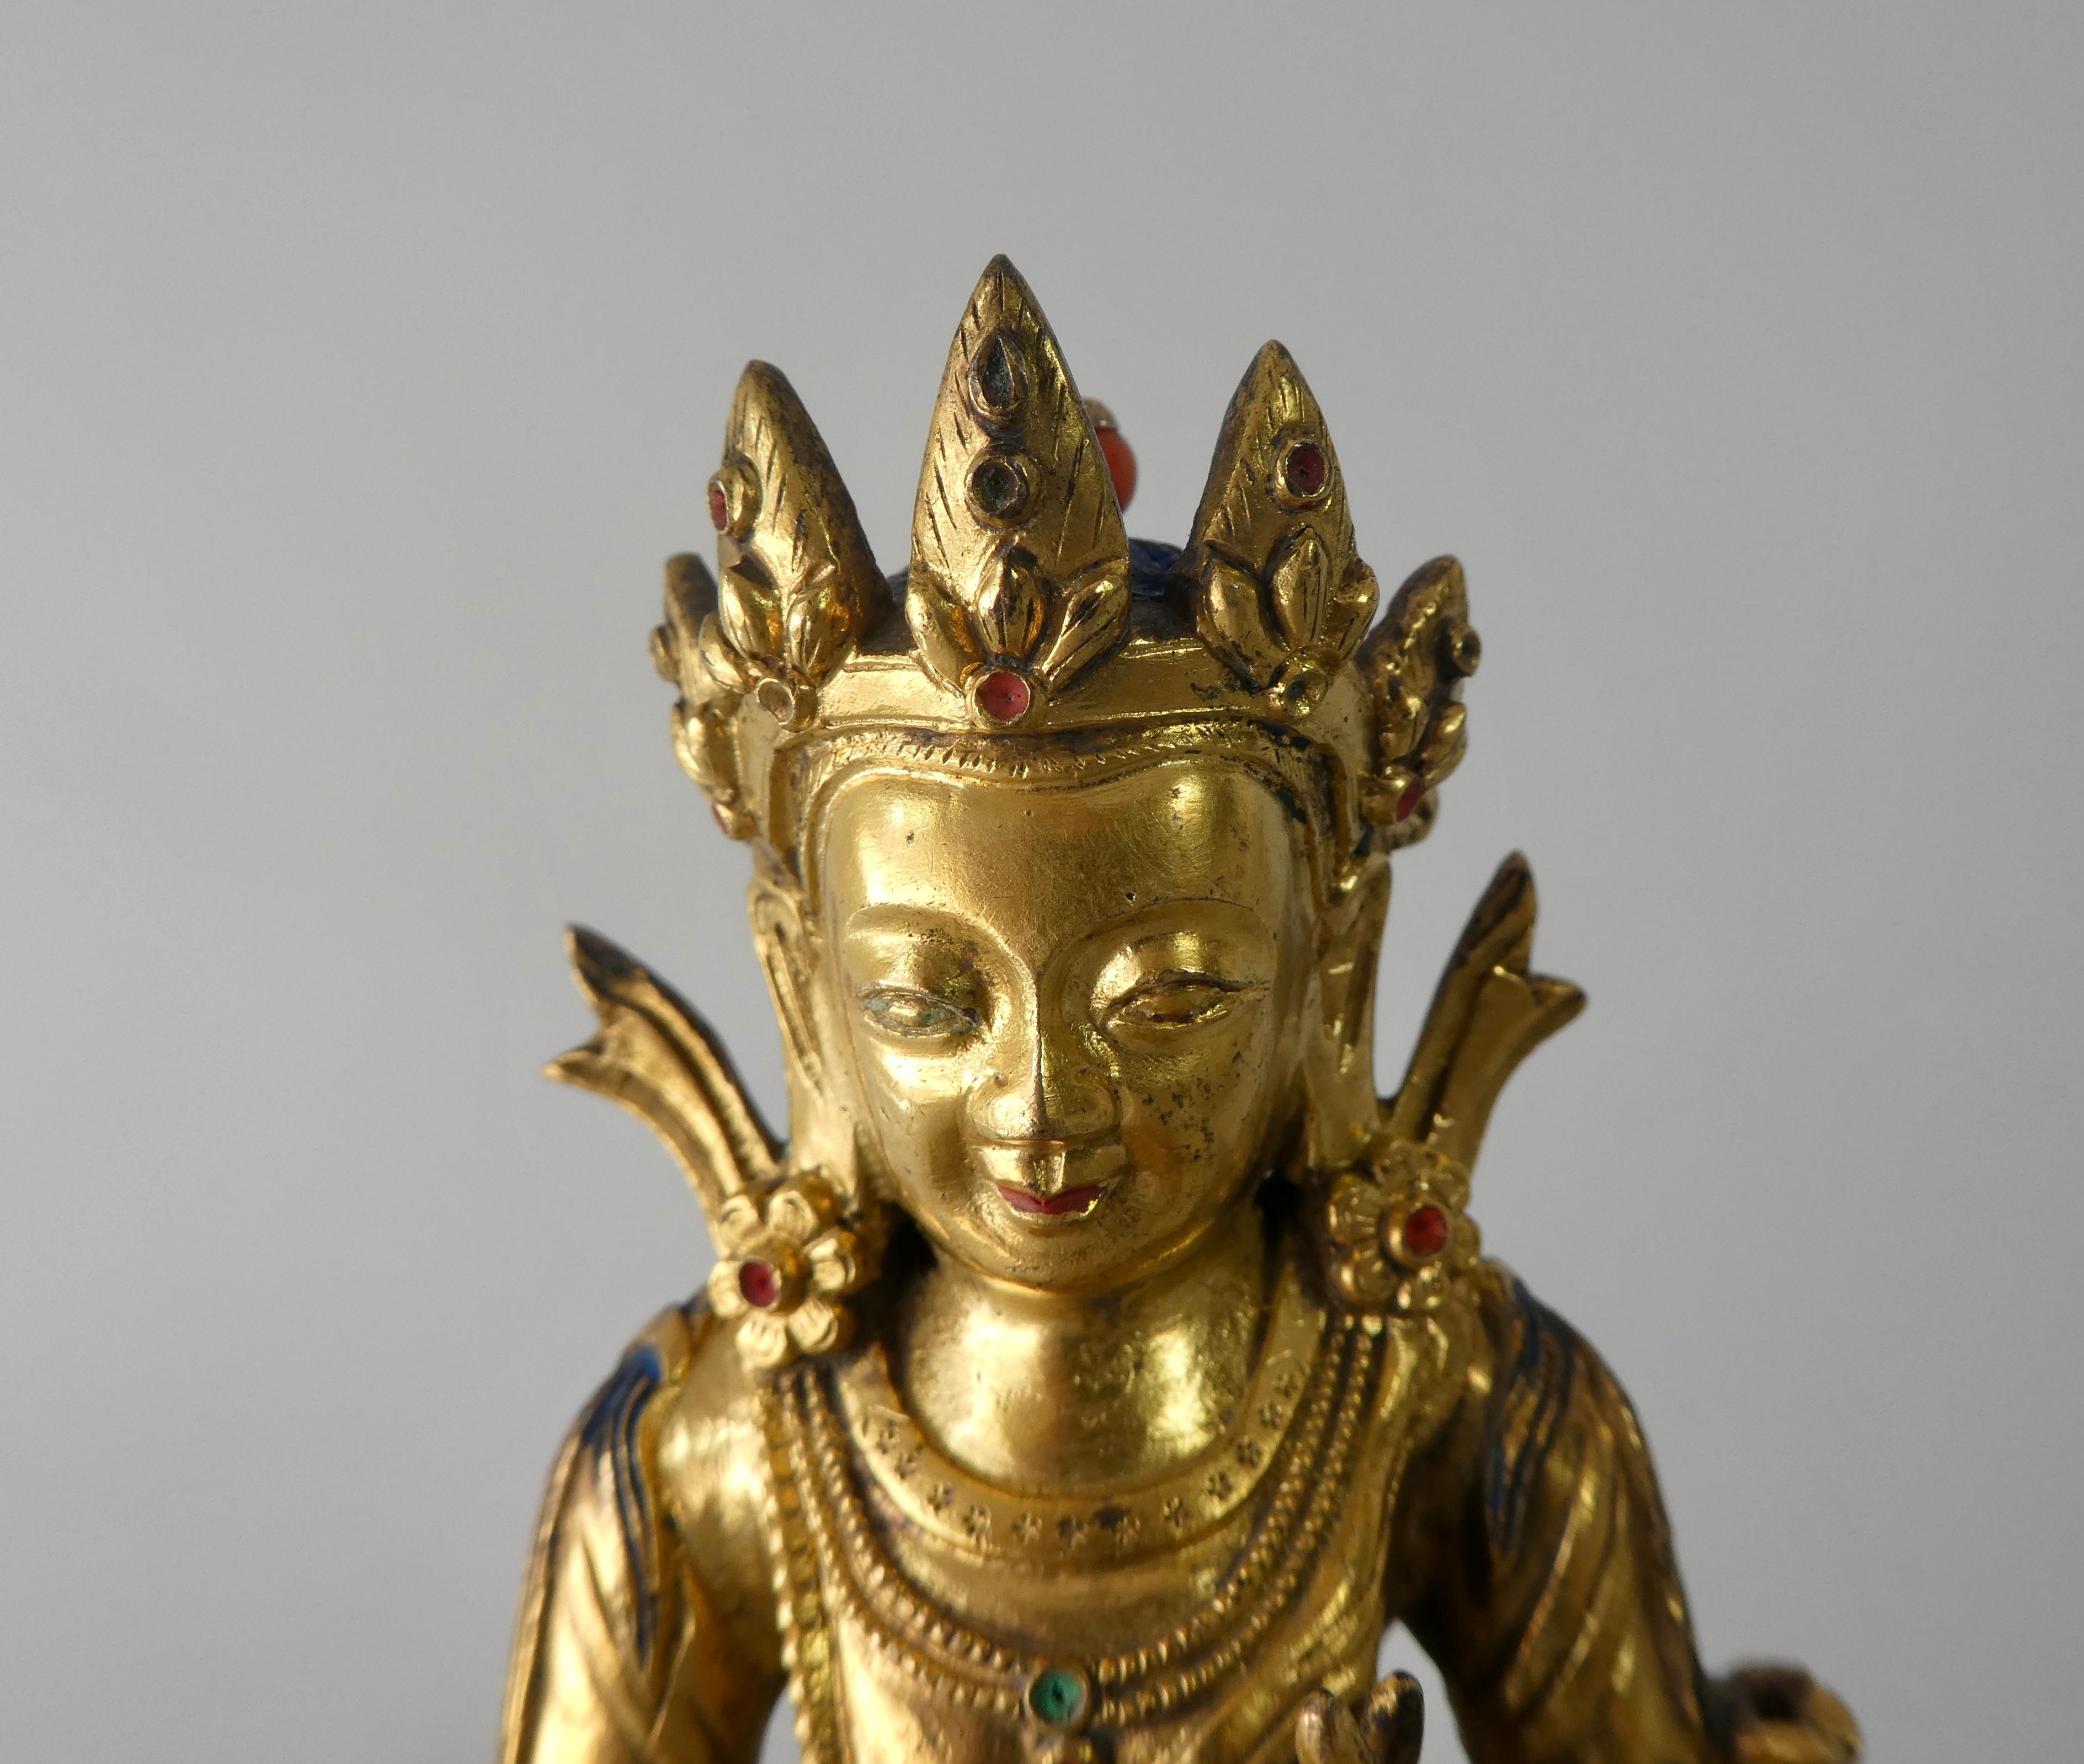 A fine Chinese gilt bronze figure, late 17th-early 18th century. Cast as green tara seated in lalitasana, and her right foot resting upon a lotus blossom. Her hands in varada, and vitarka mudra. She is dressed in a dhoti, with engraved scrollwork to